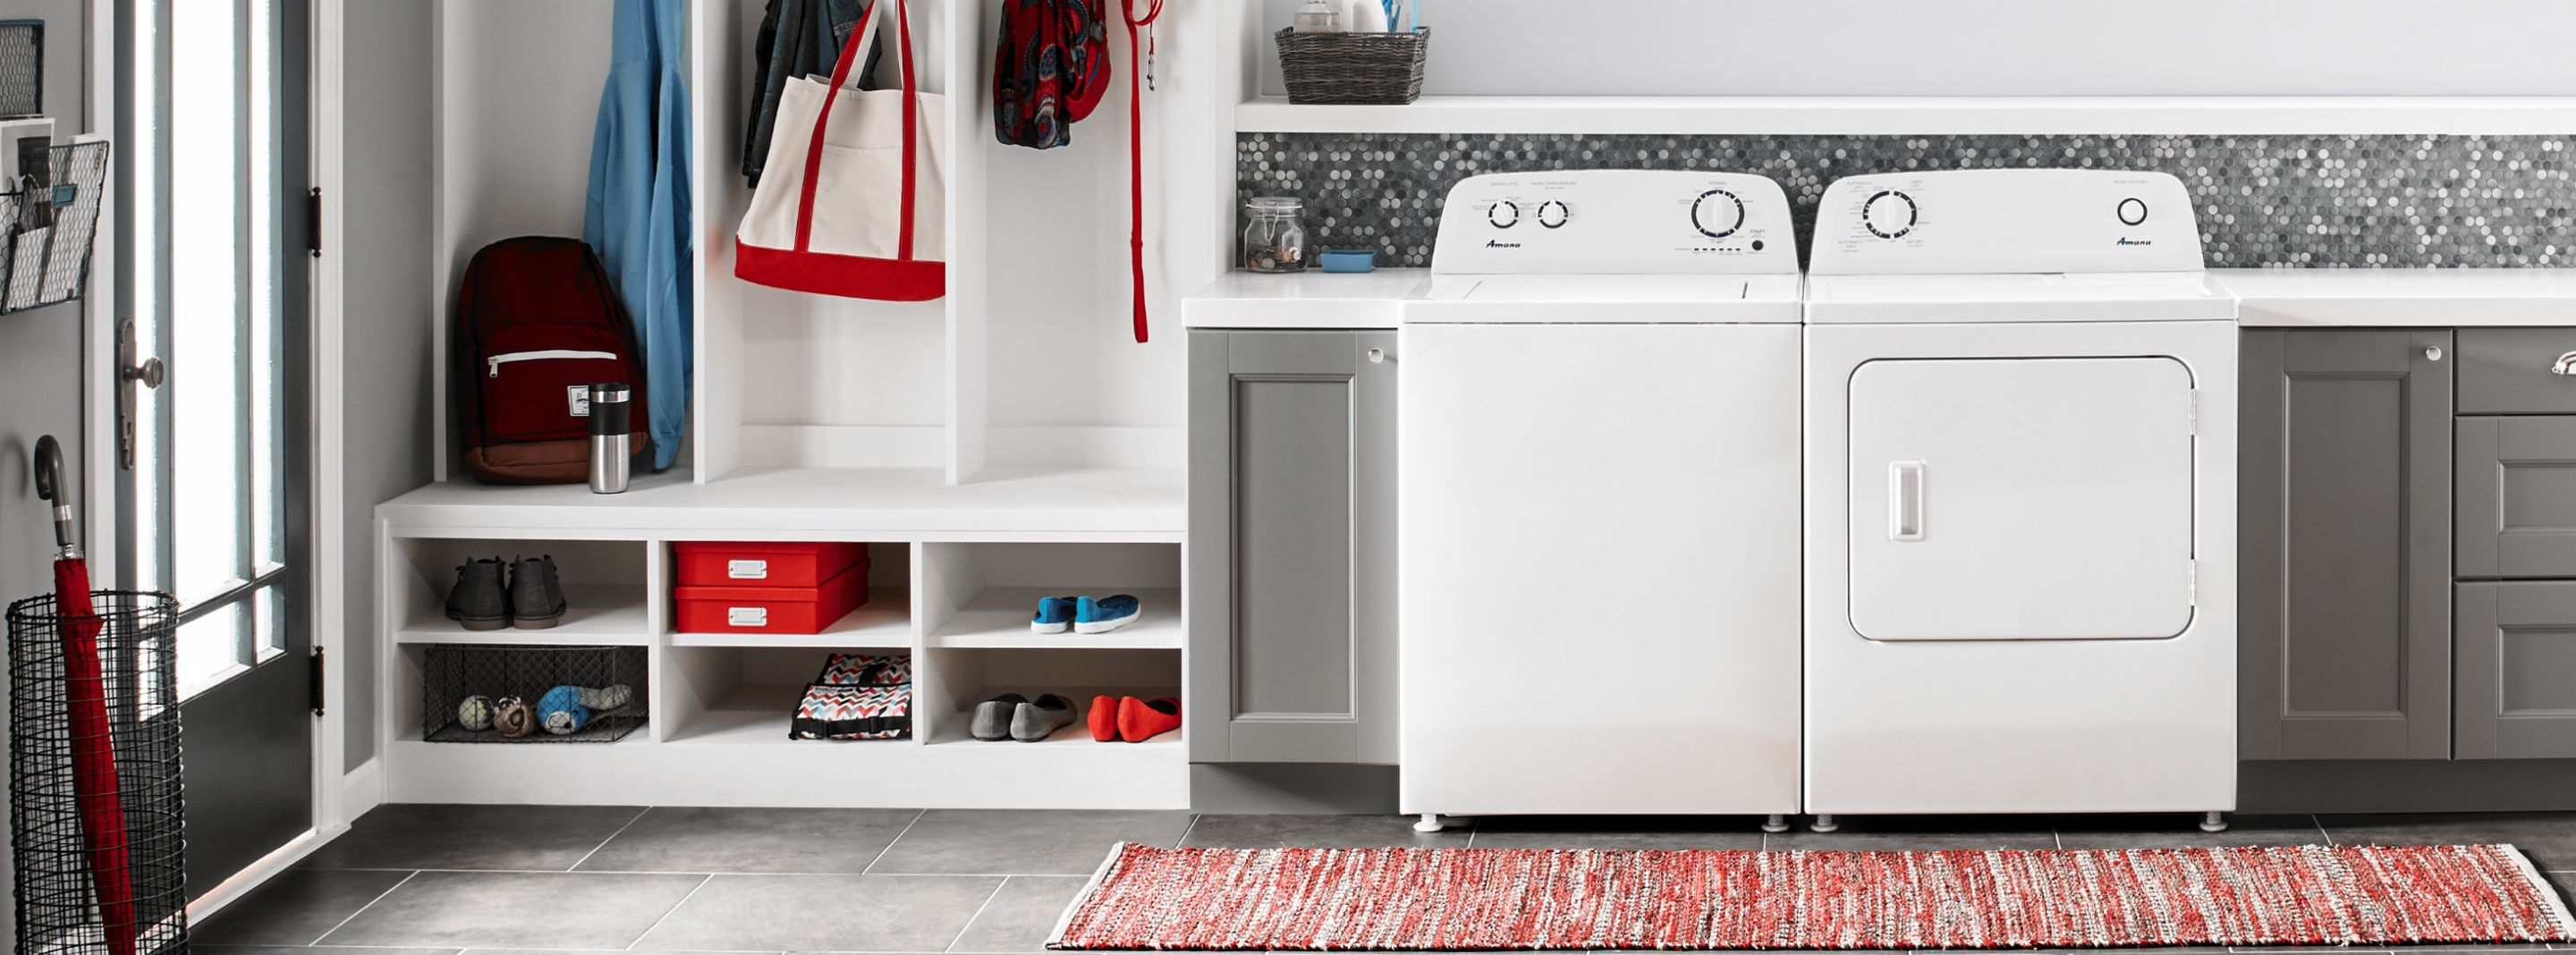 A white Amana® washer and dryer in grey cabinetry